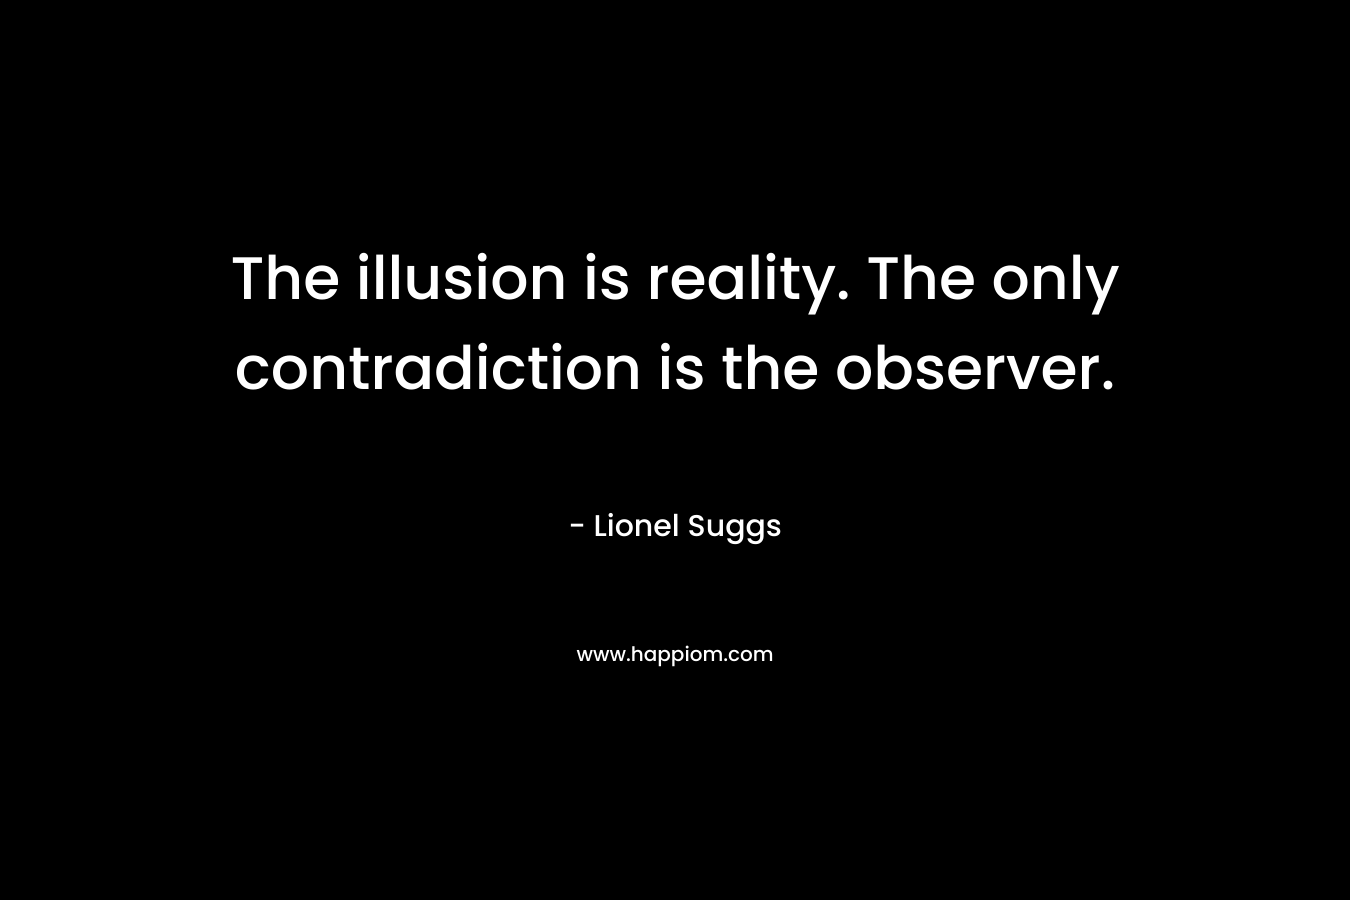 The illusion is reality. The only contradiction is the observer.